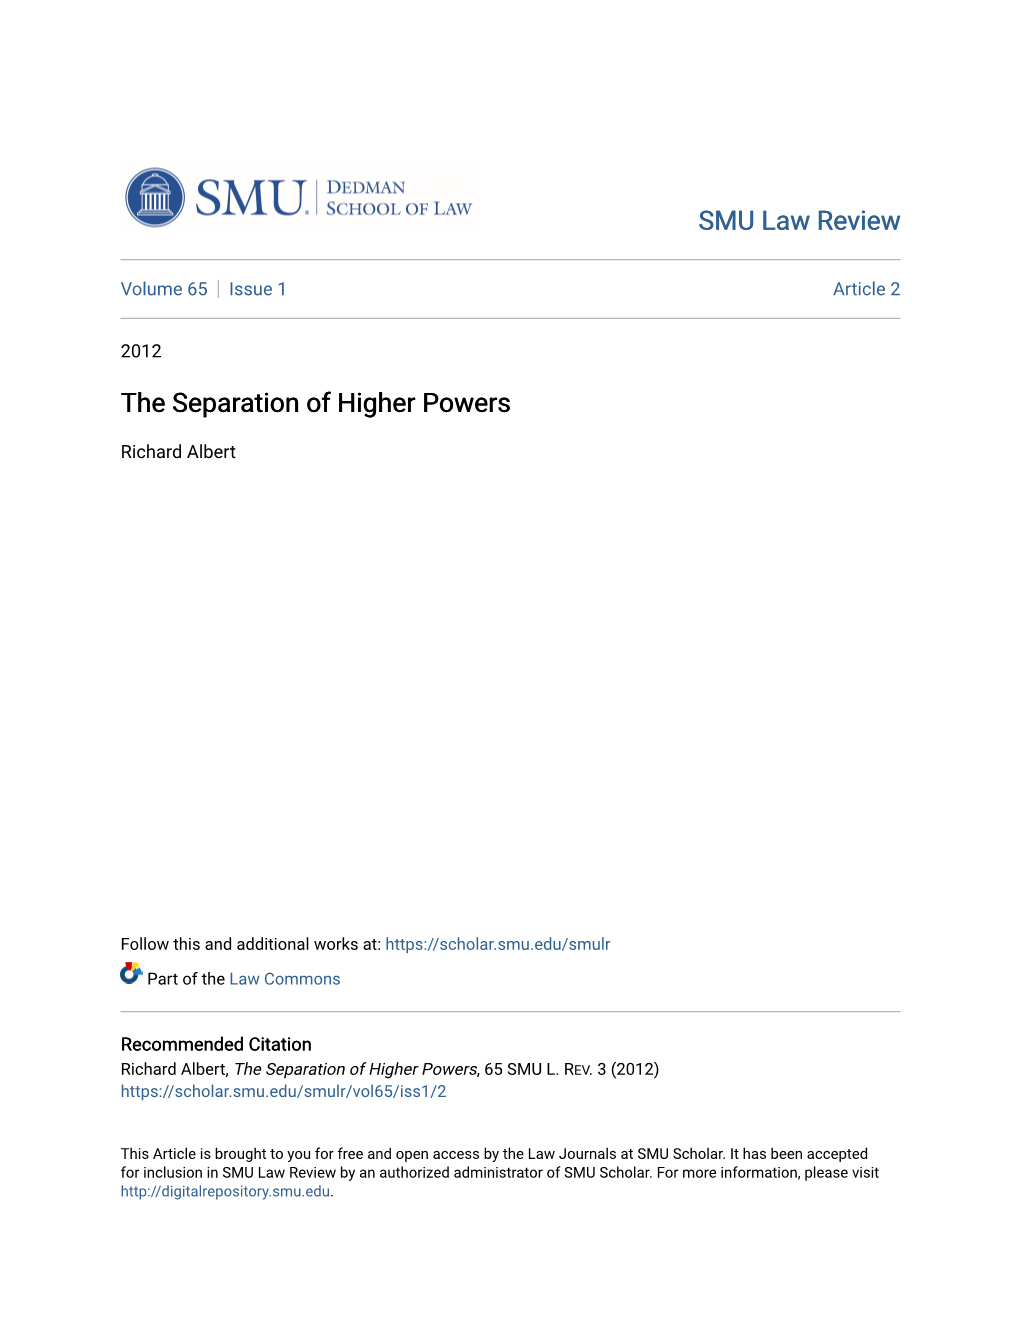 The Separation of Higher Powers